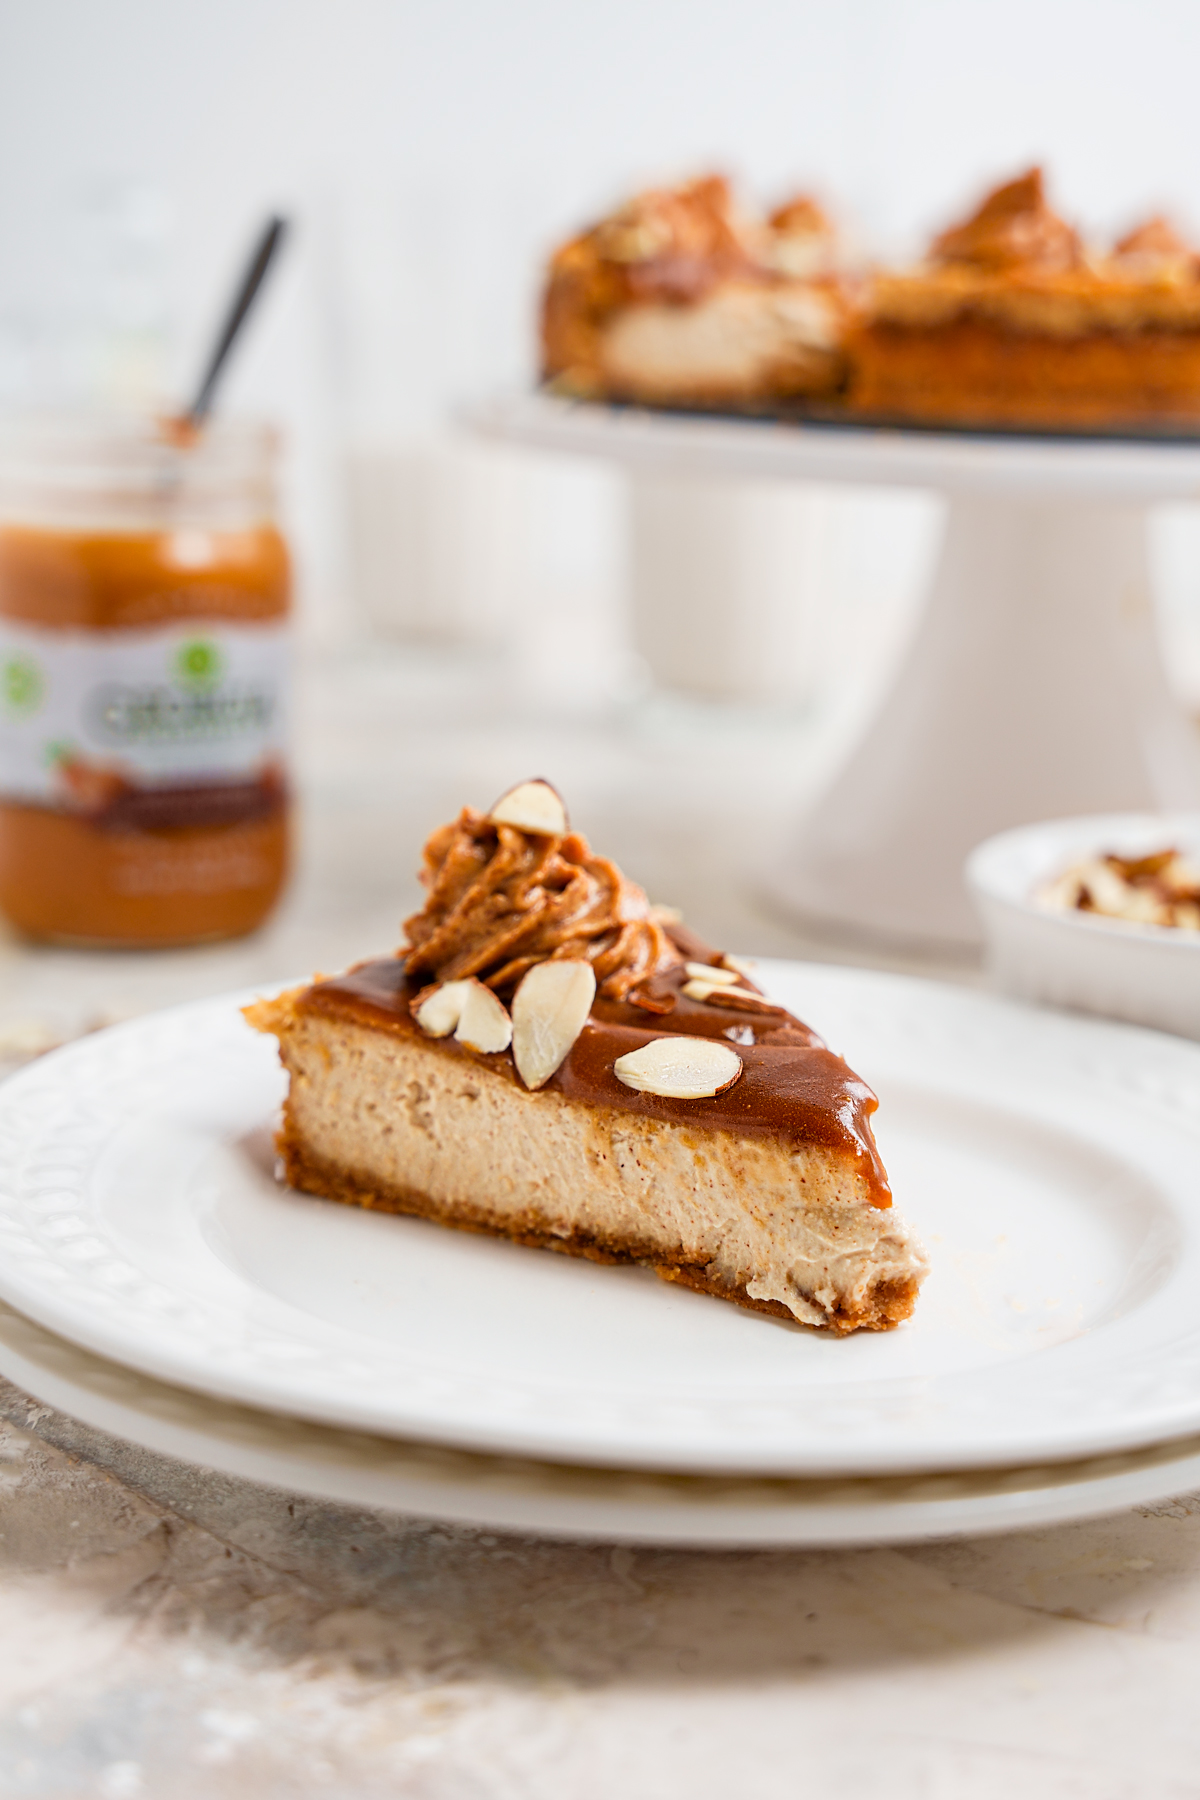 a slice of the maple almond caramel cheesecake to show the creamy texture and gooey caramel topping